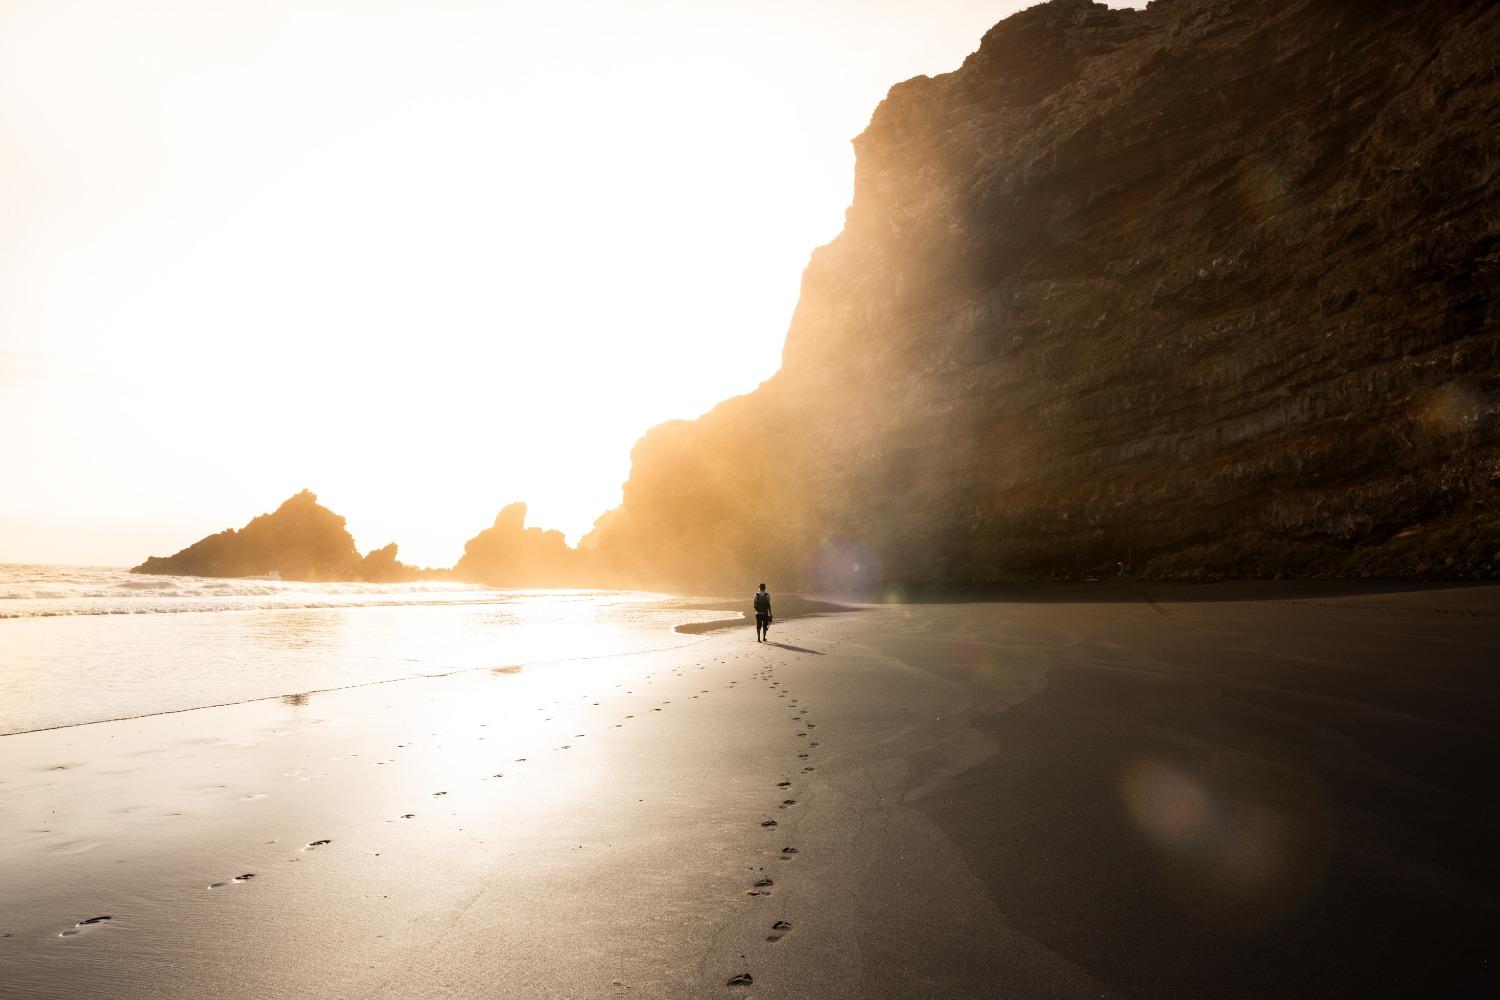 A lone person walks on the beach as the sun rises on the horizon